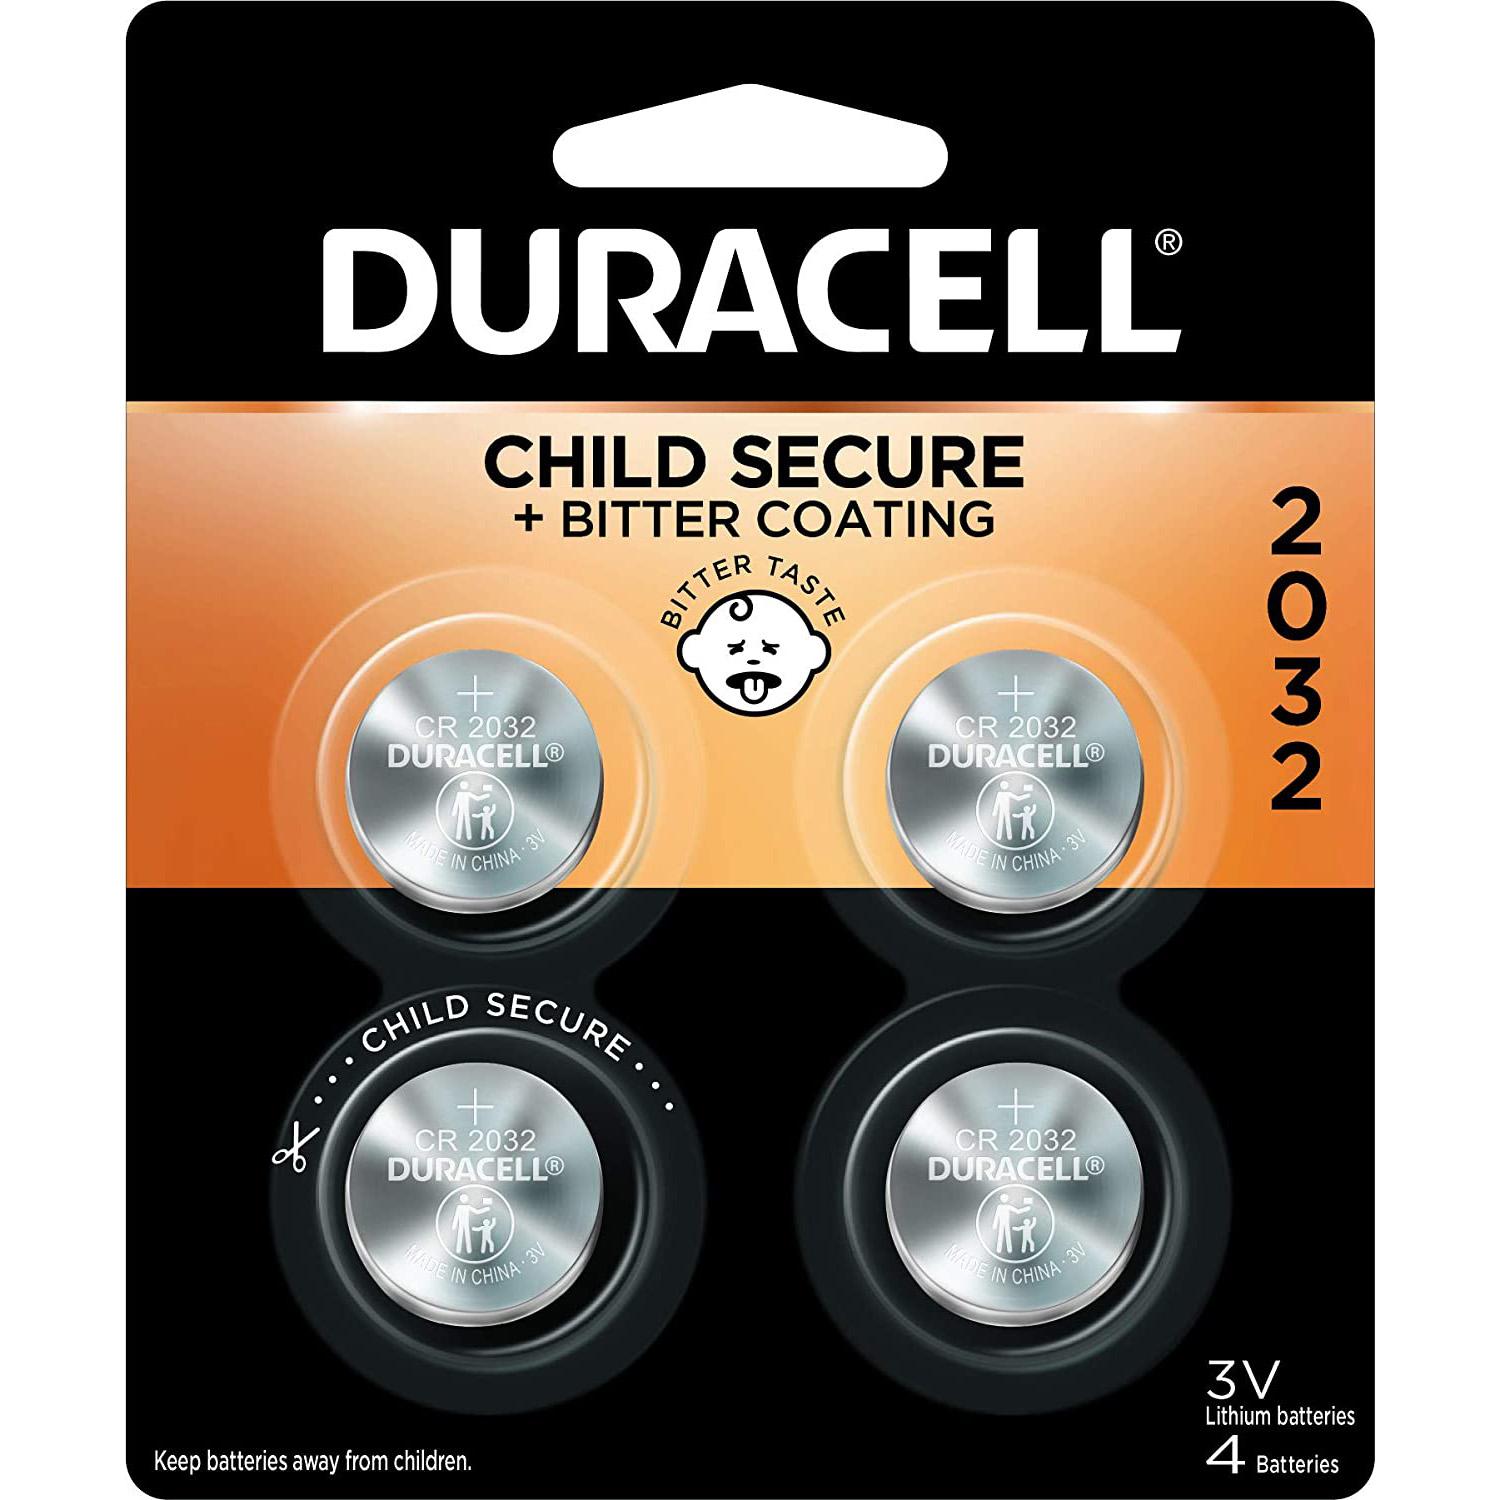 4 Duracell 2032 3V Lithium Coin Battery for $2.02 Shipped